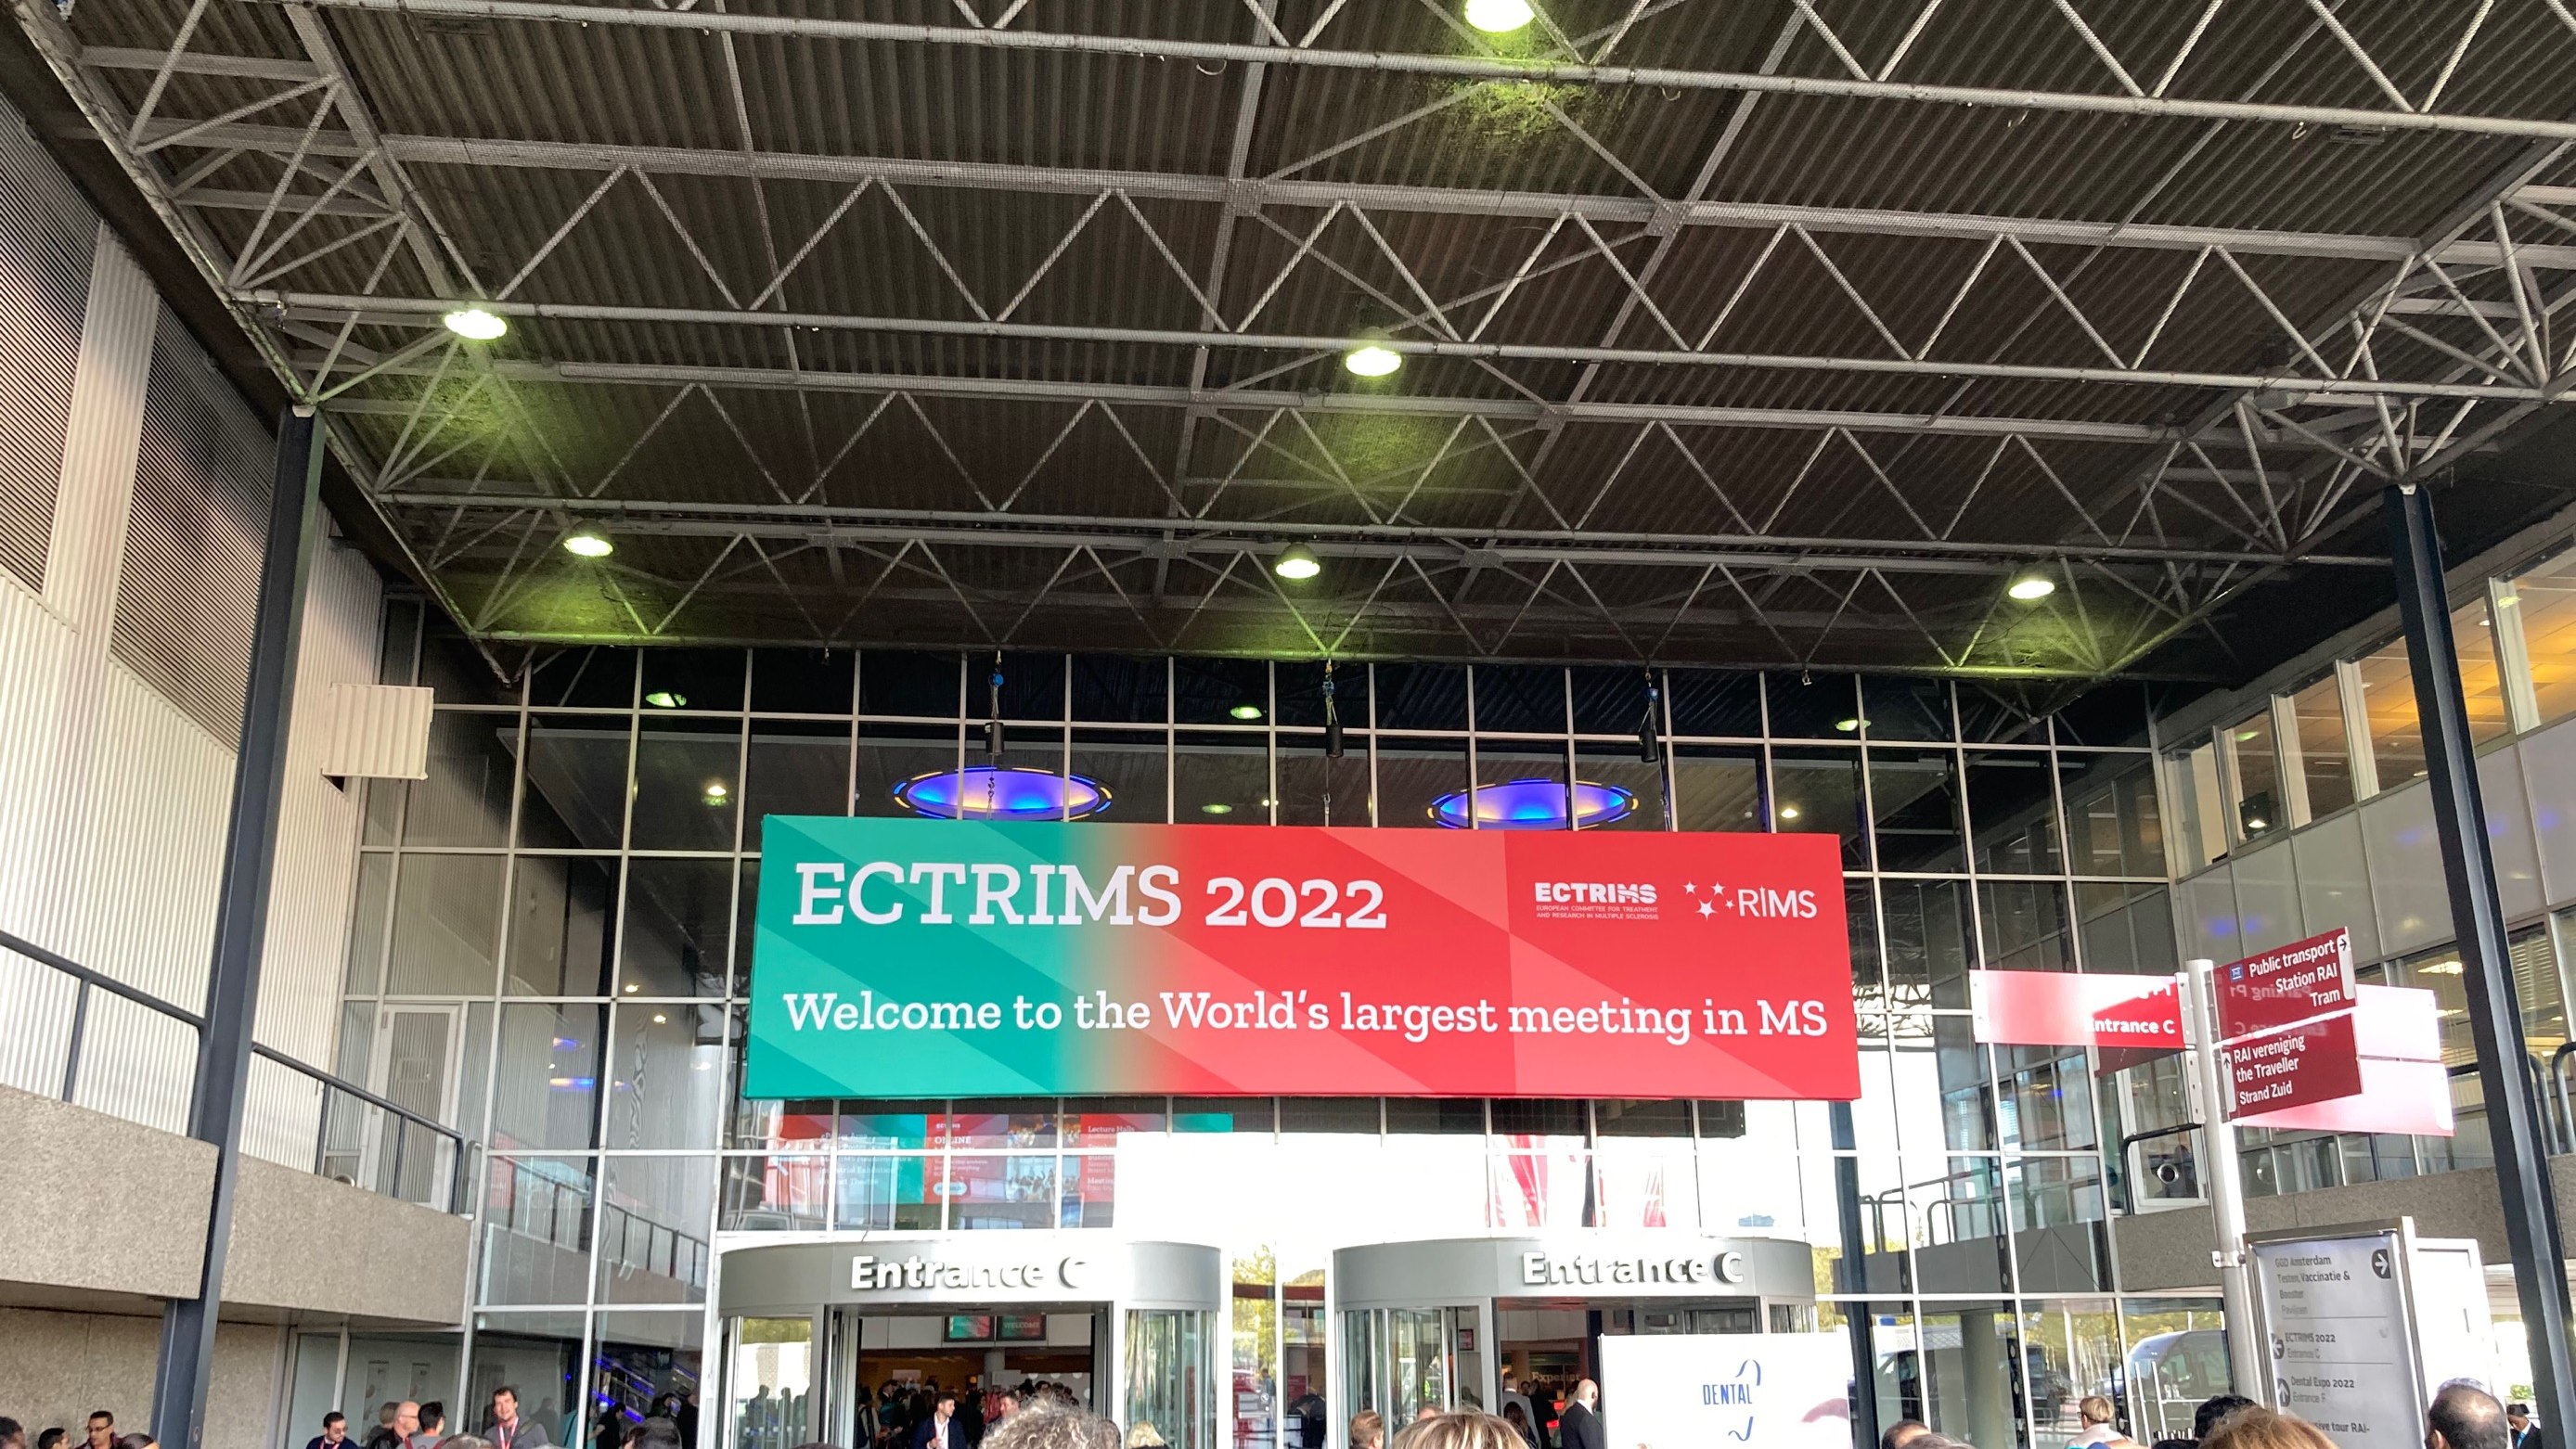 Exercise and MS at the ECTRIMS research conference MS Society